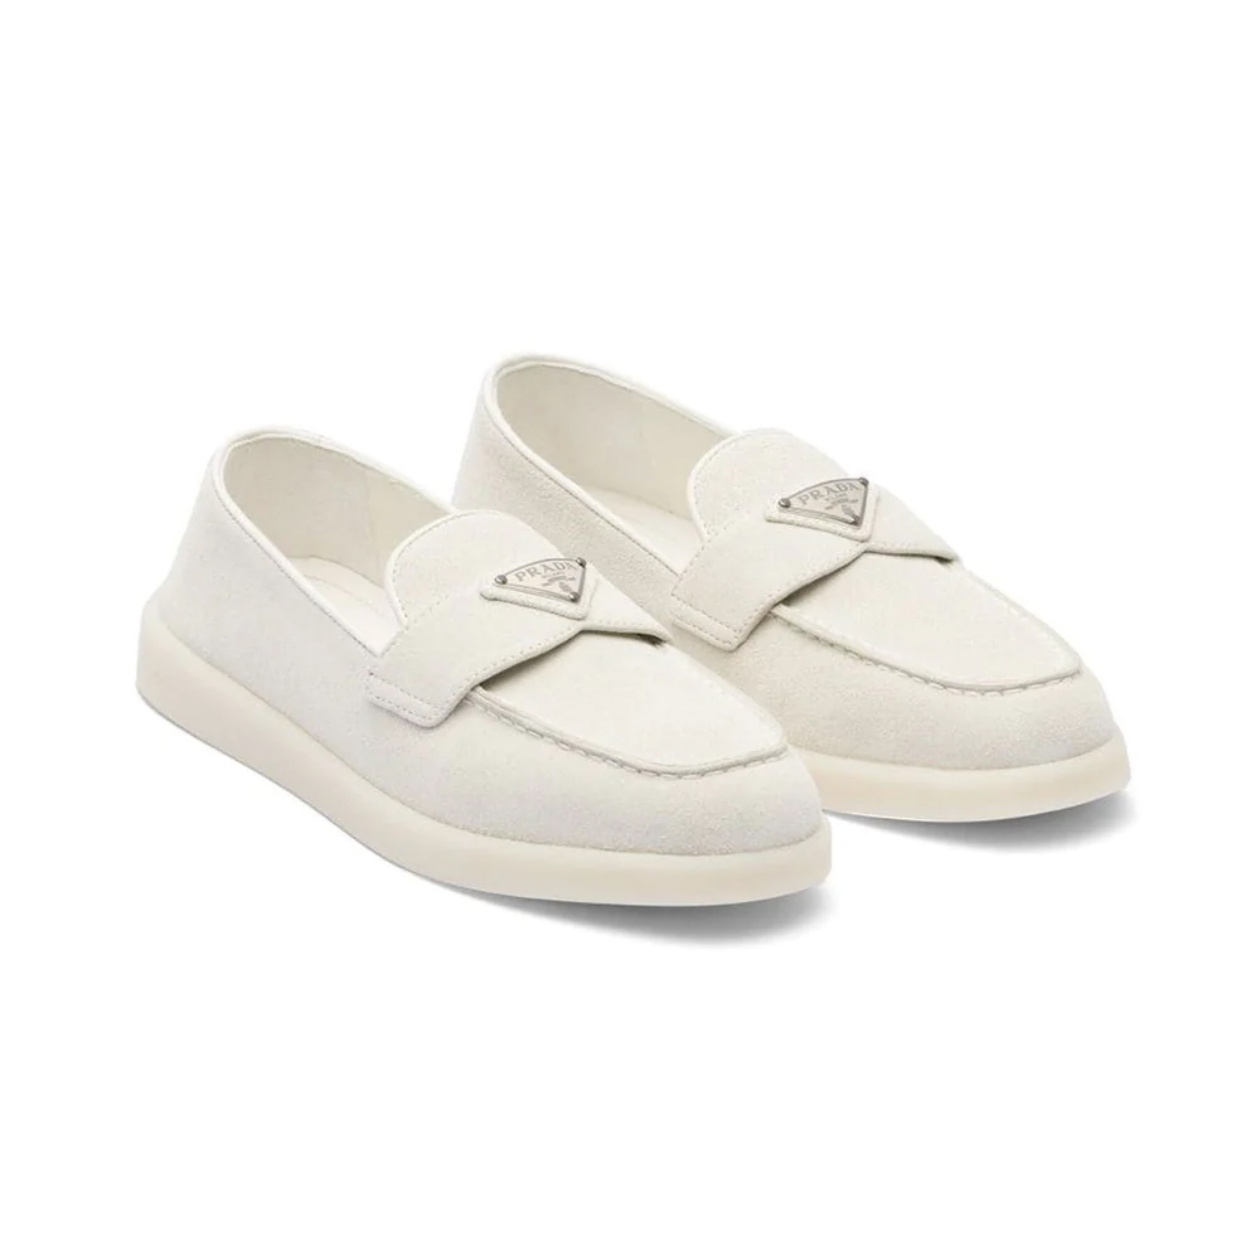 Prada Suede Leather Loafers White